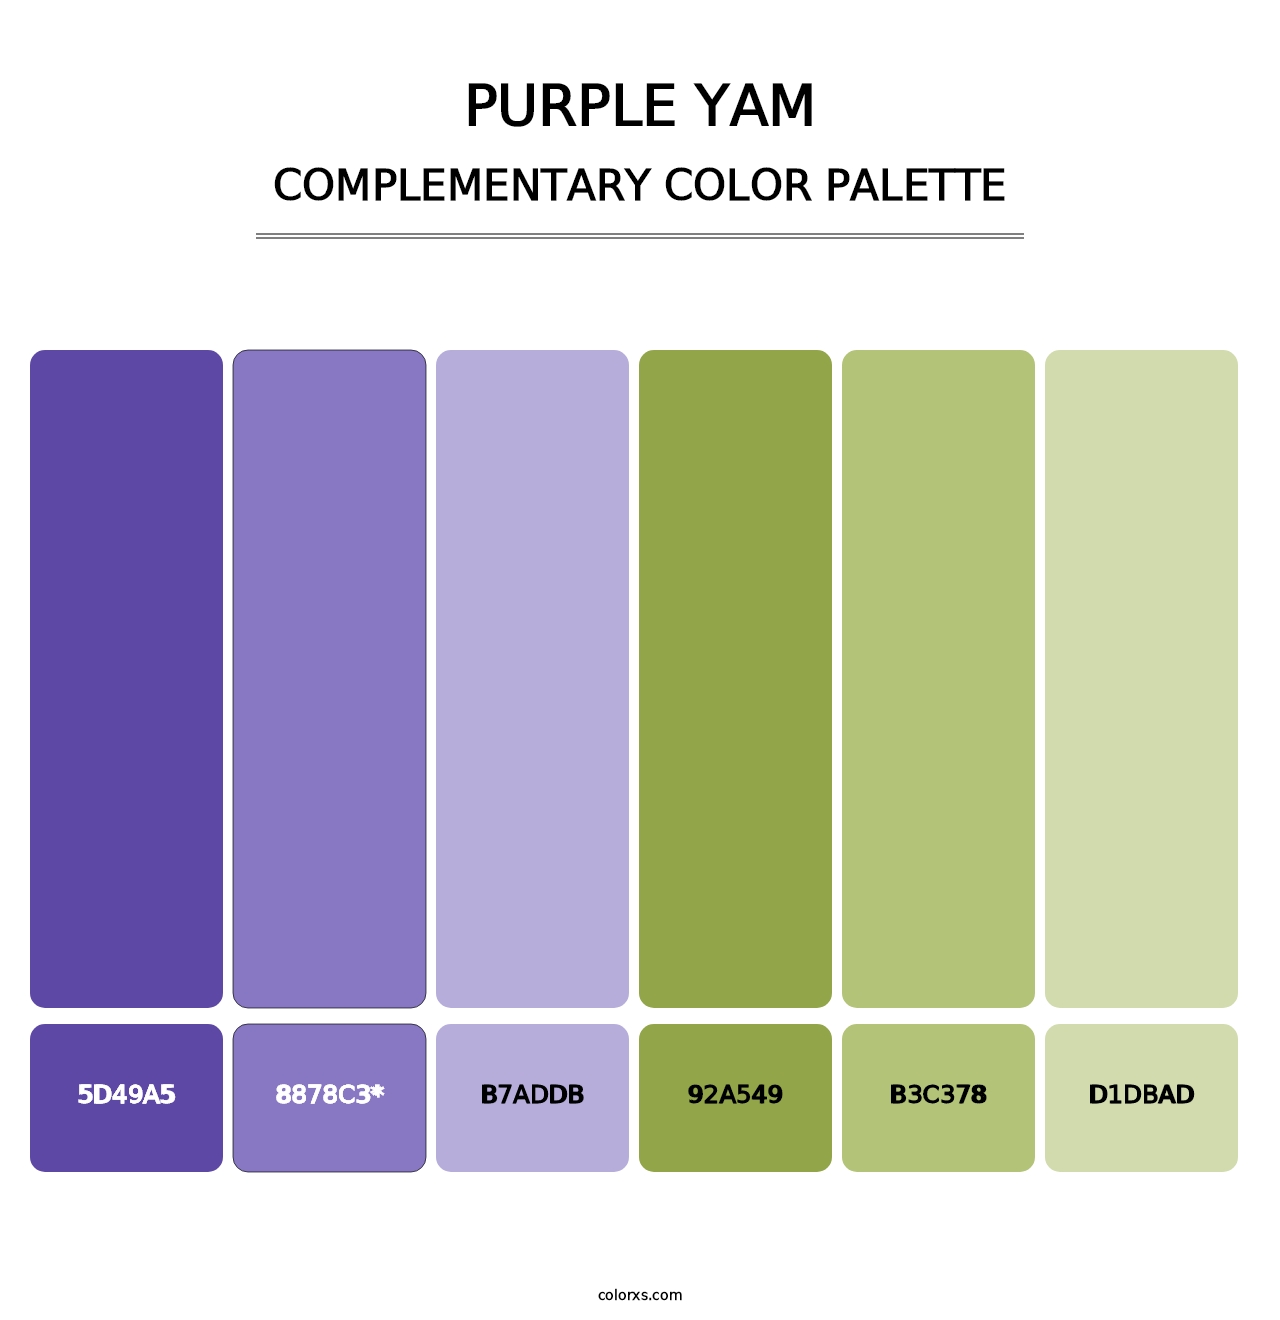 Purple Yam - Complementary Color Palette